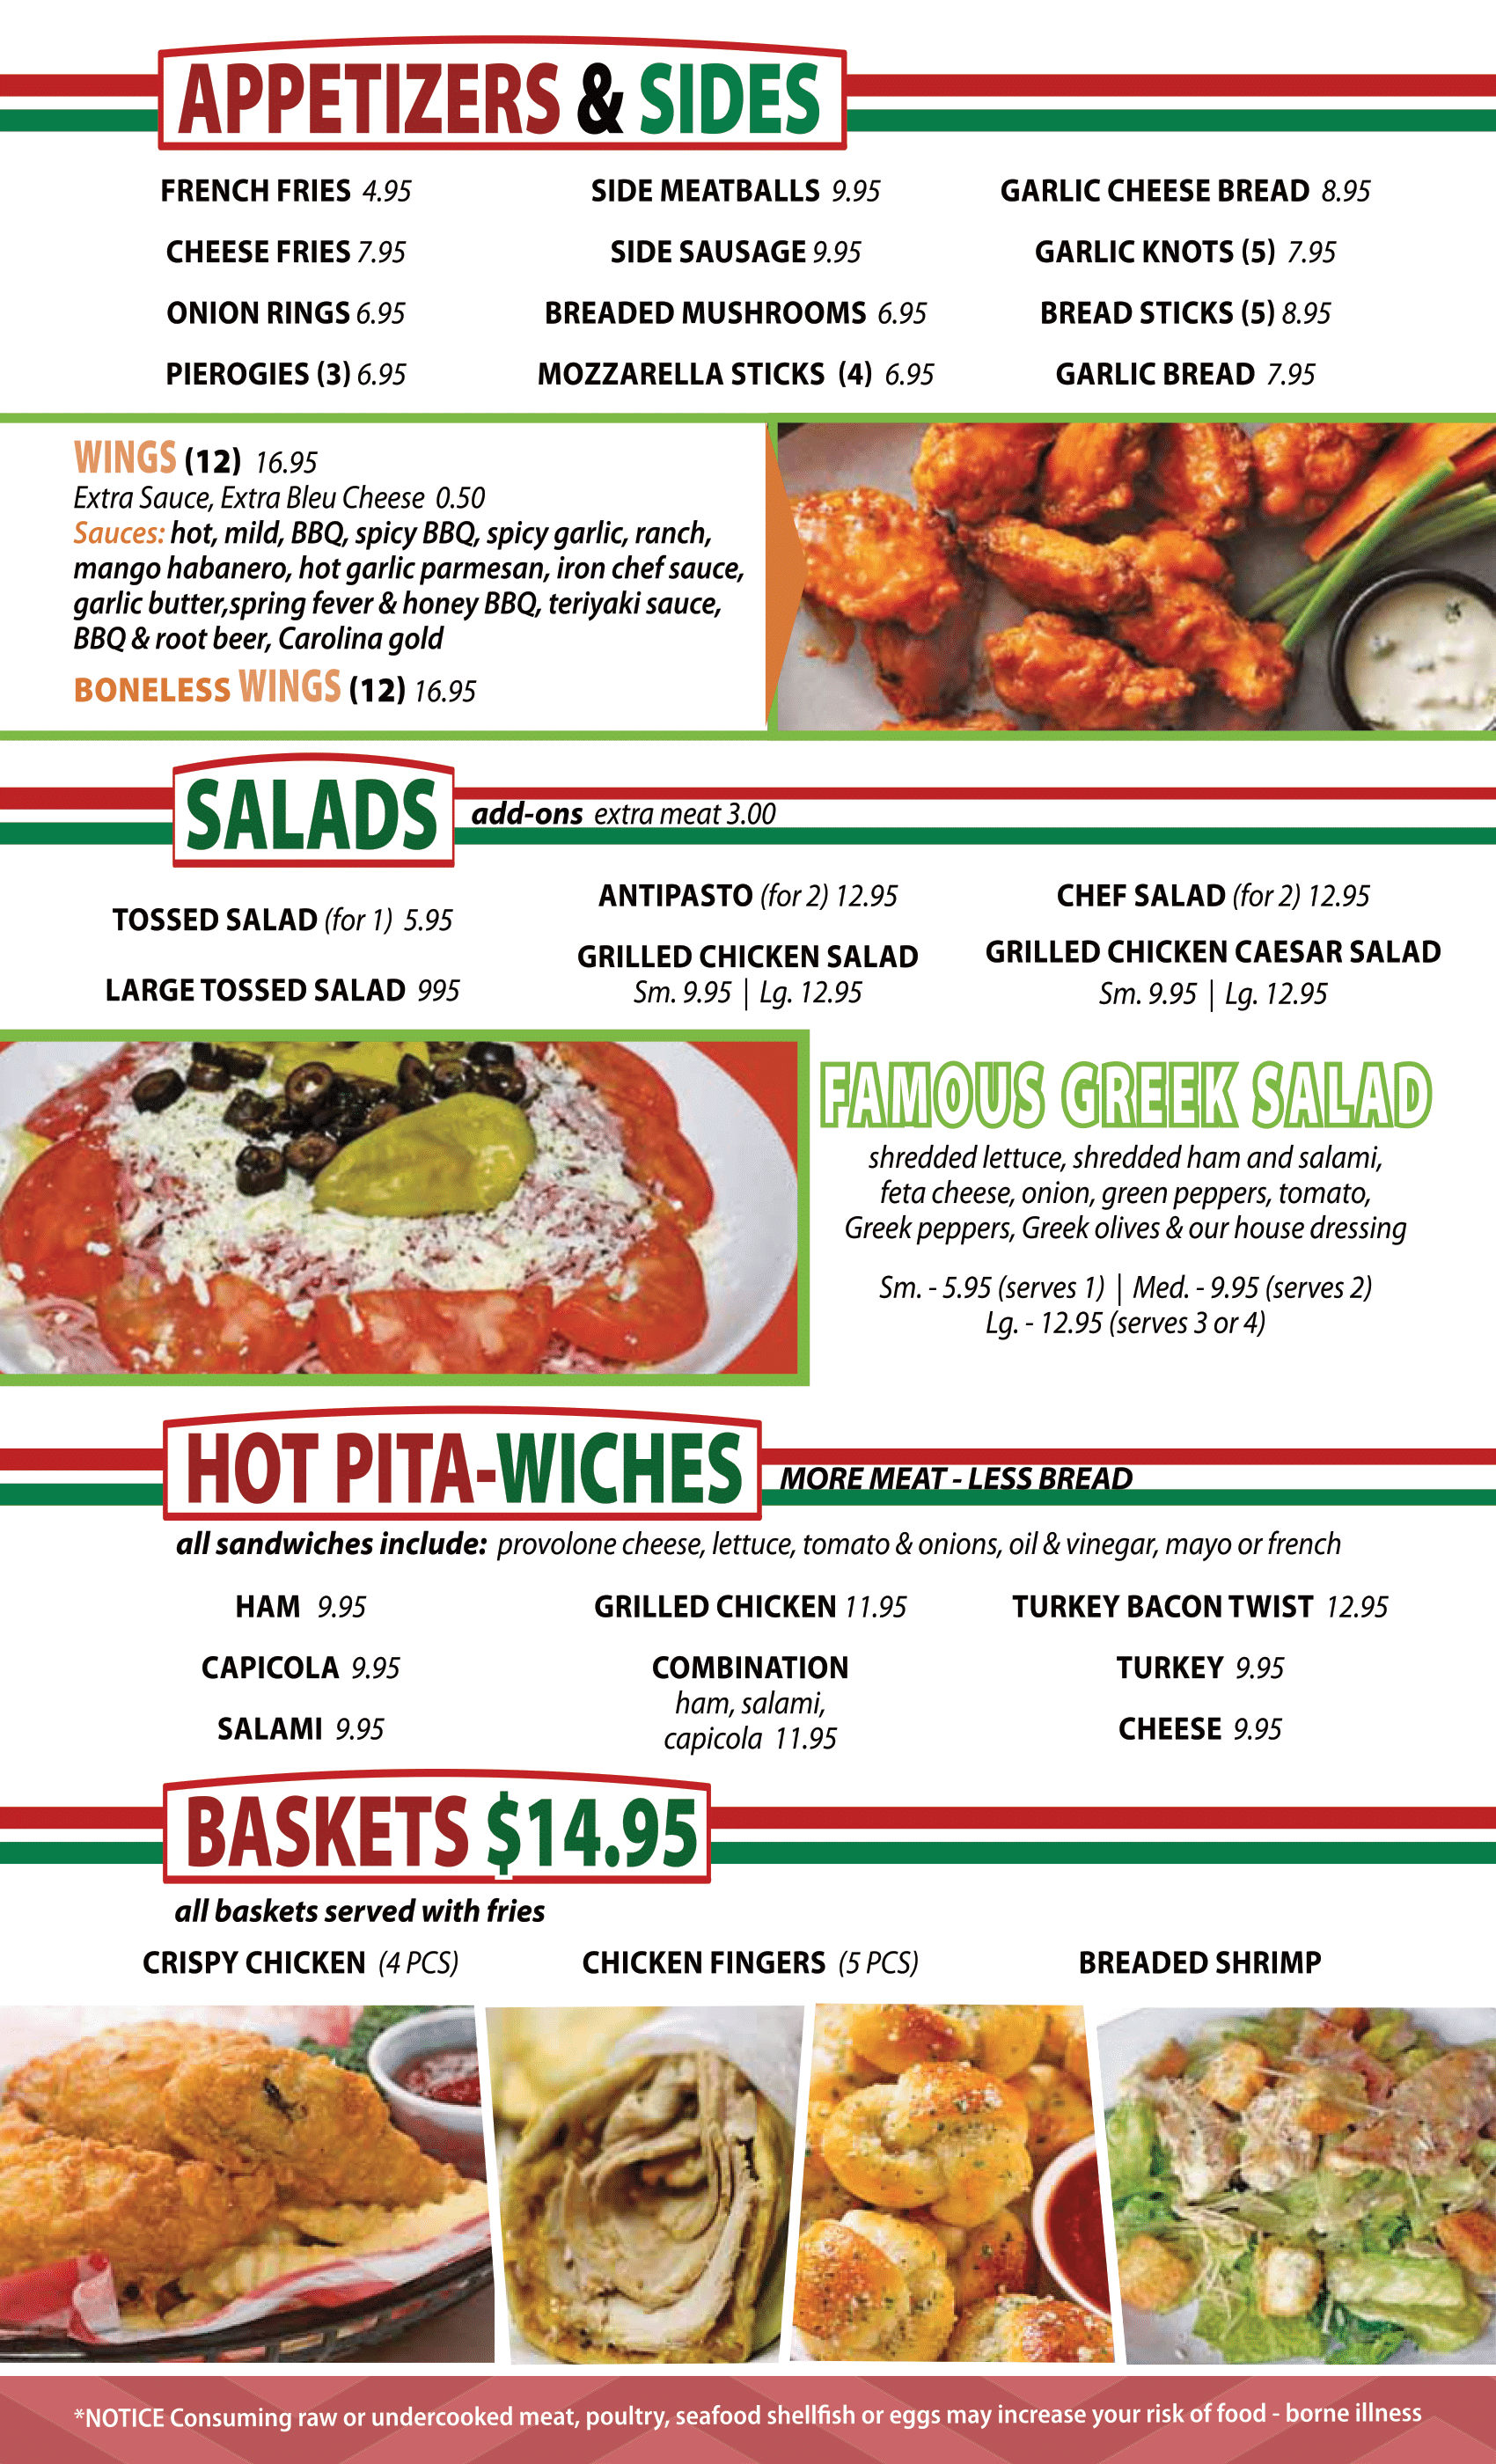 Old Mill Pizzeria - Appetizers & Sides, Salads, Hot Pita-wiches, and Baskets Menu